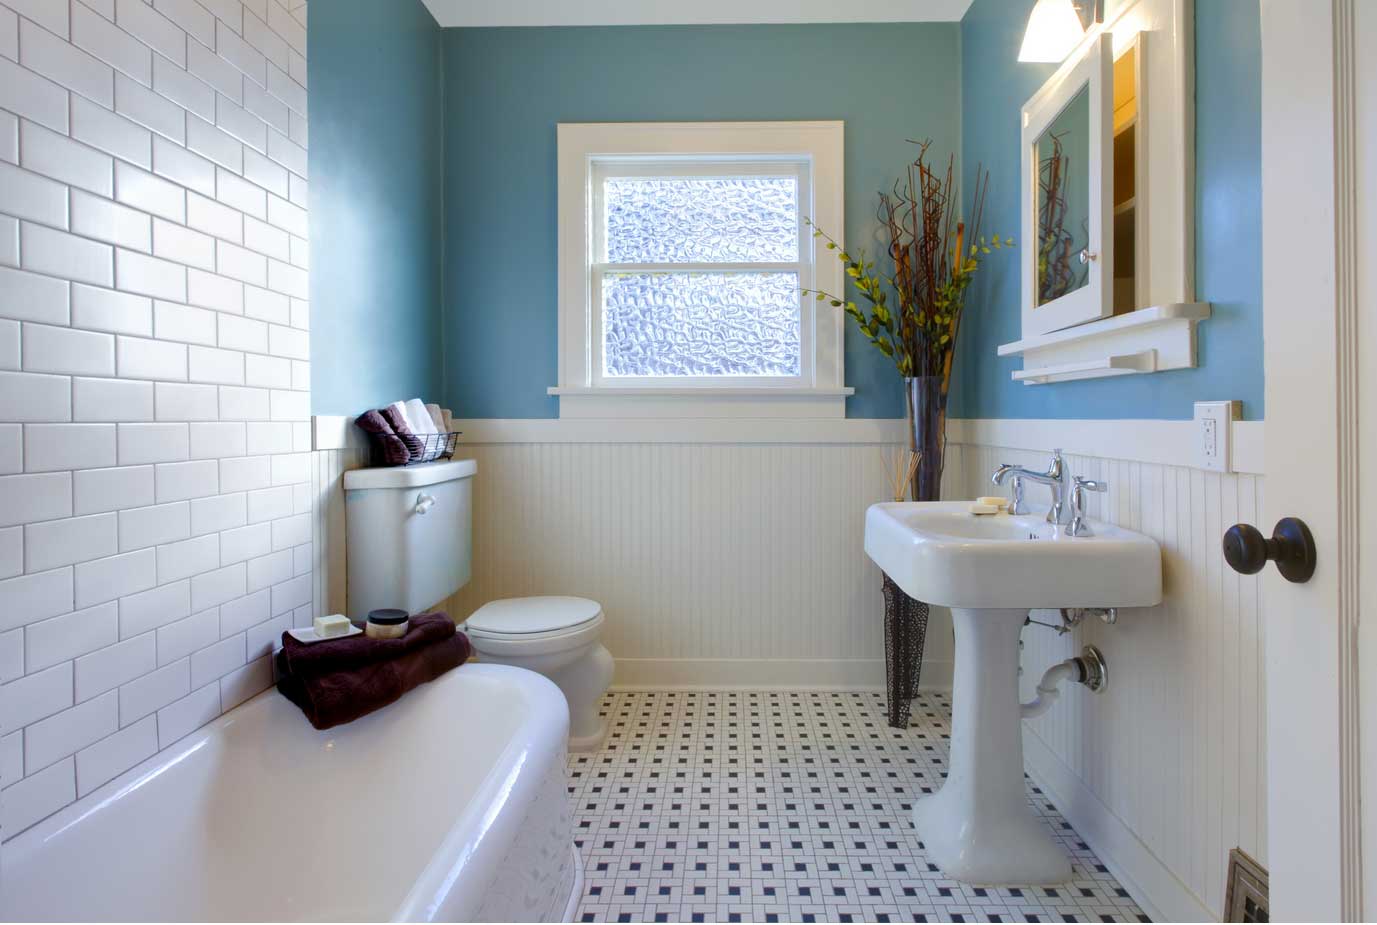 A white and blue bathroom with pedestal sink.